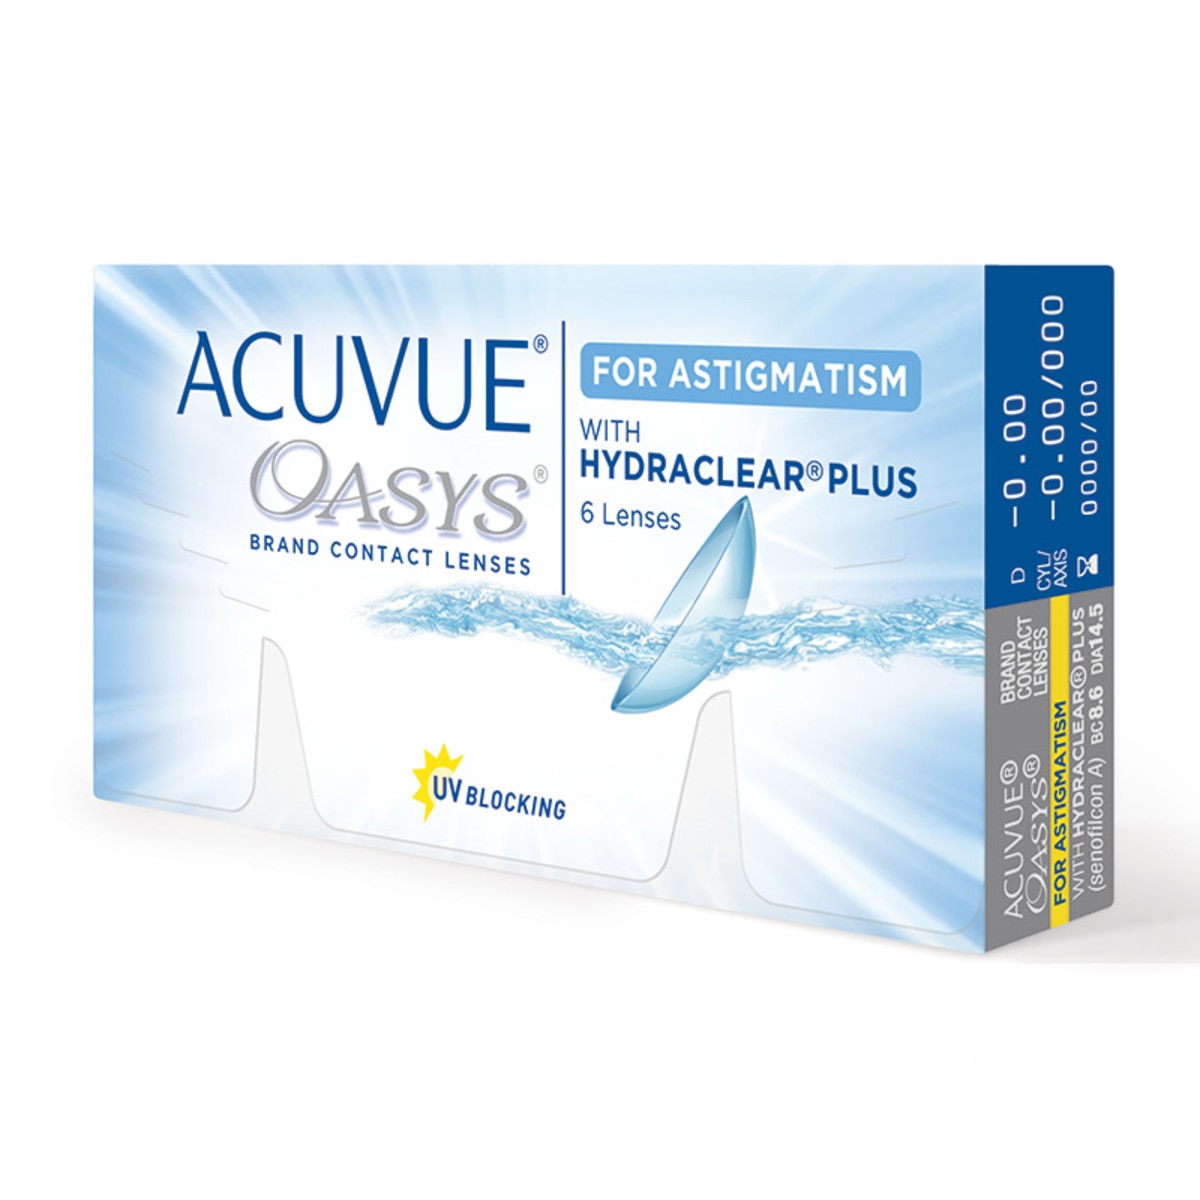 ACUVUE OASYS® con HYDRACLEAR Plus® para Astigmatismo (D -5.25, Cyl/Axis -2.25/90)